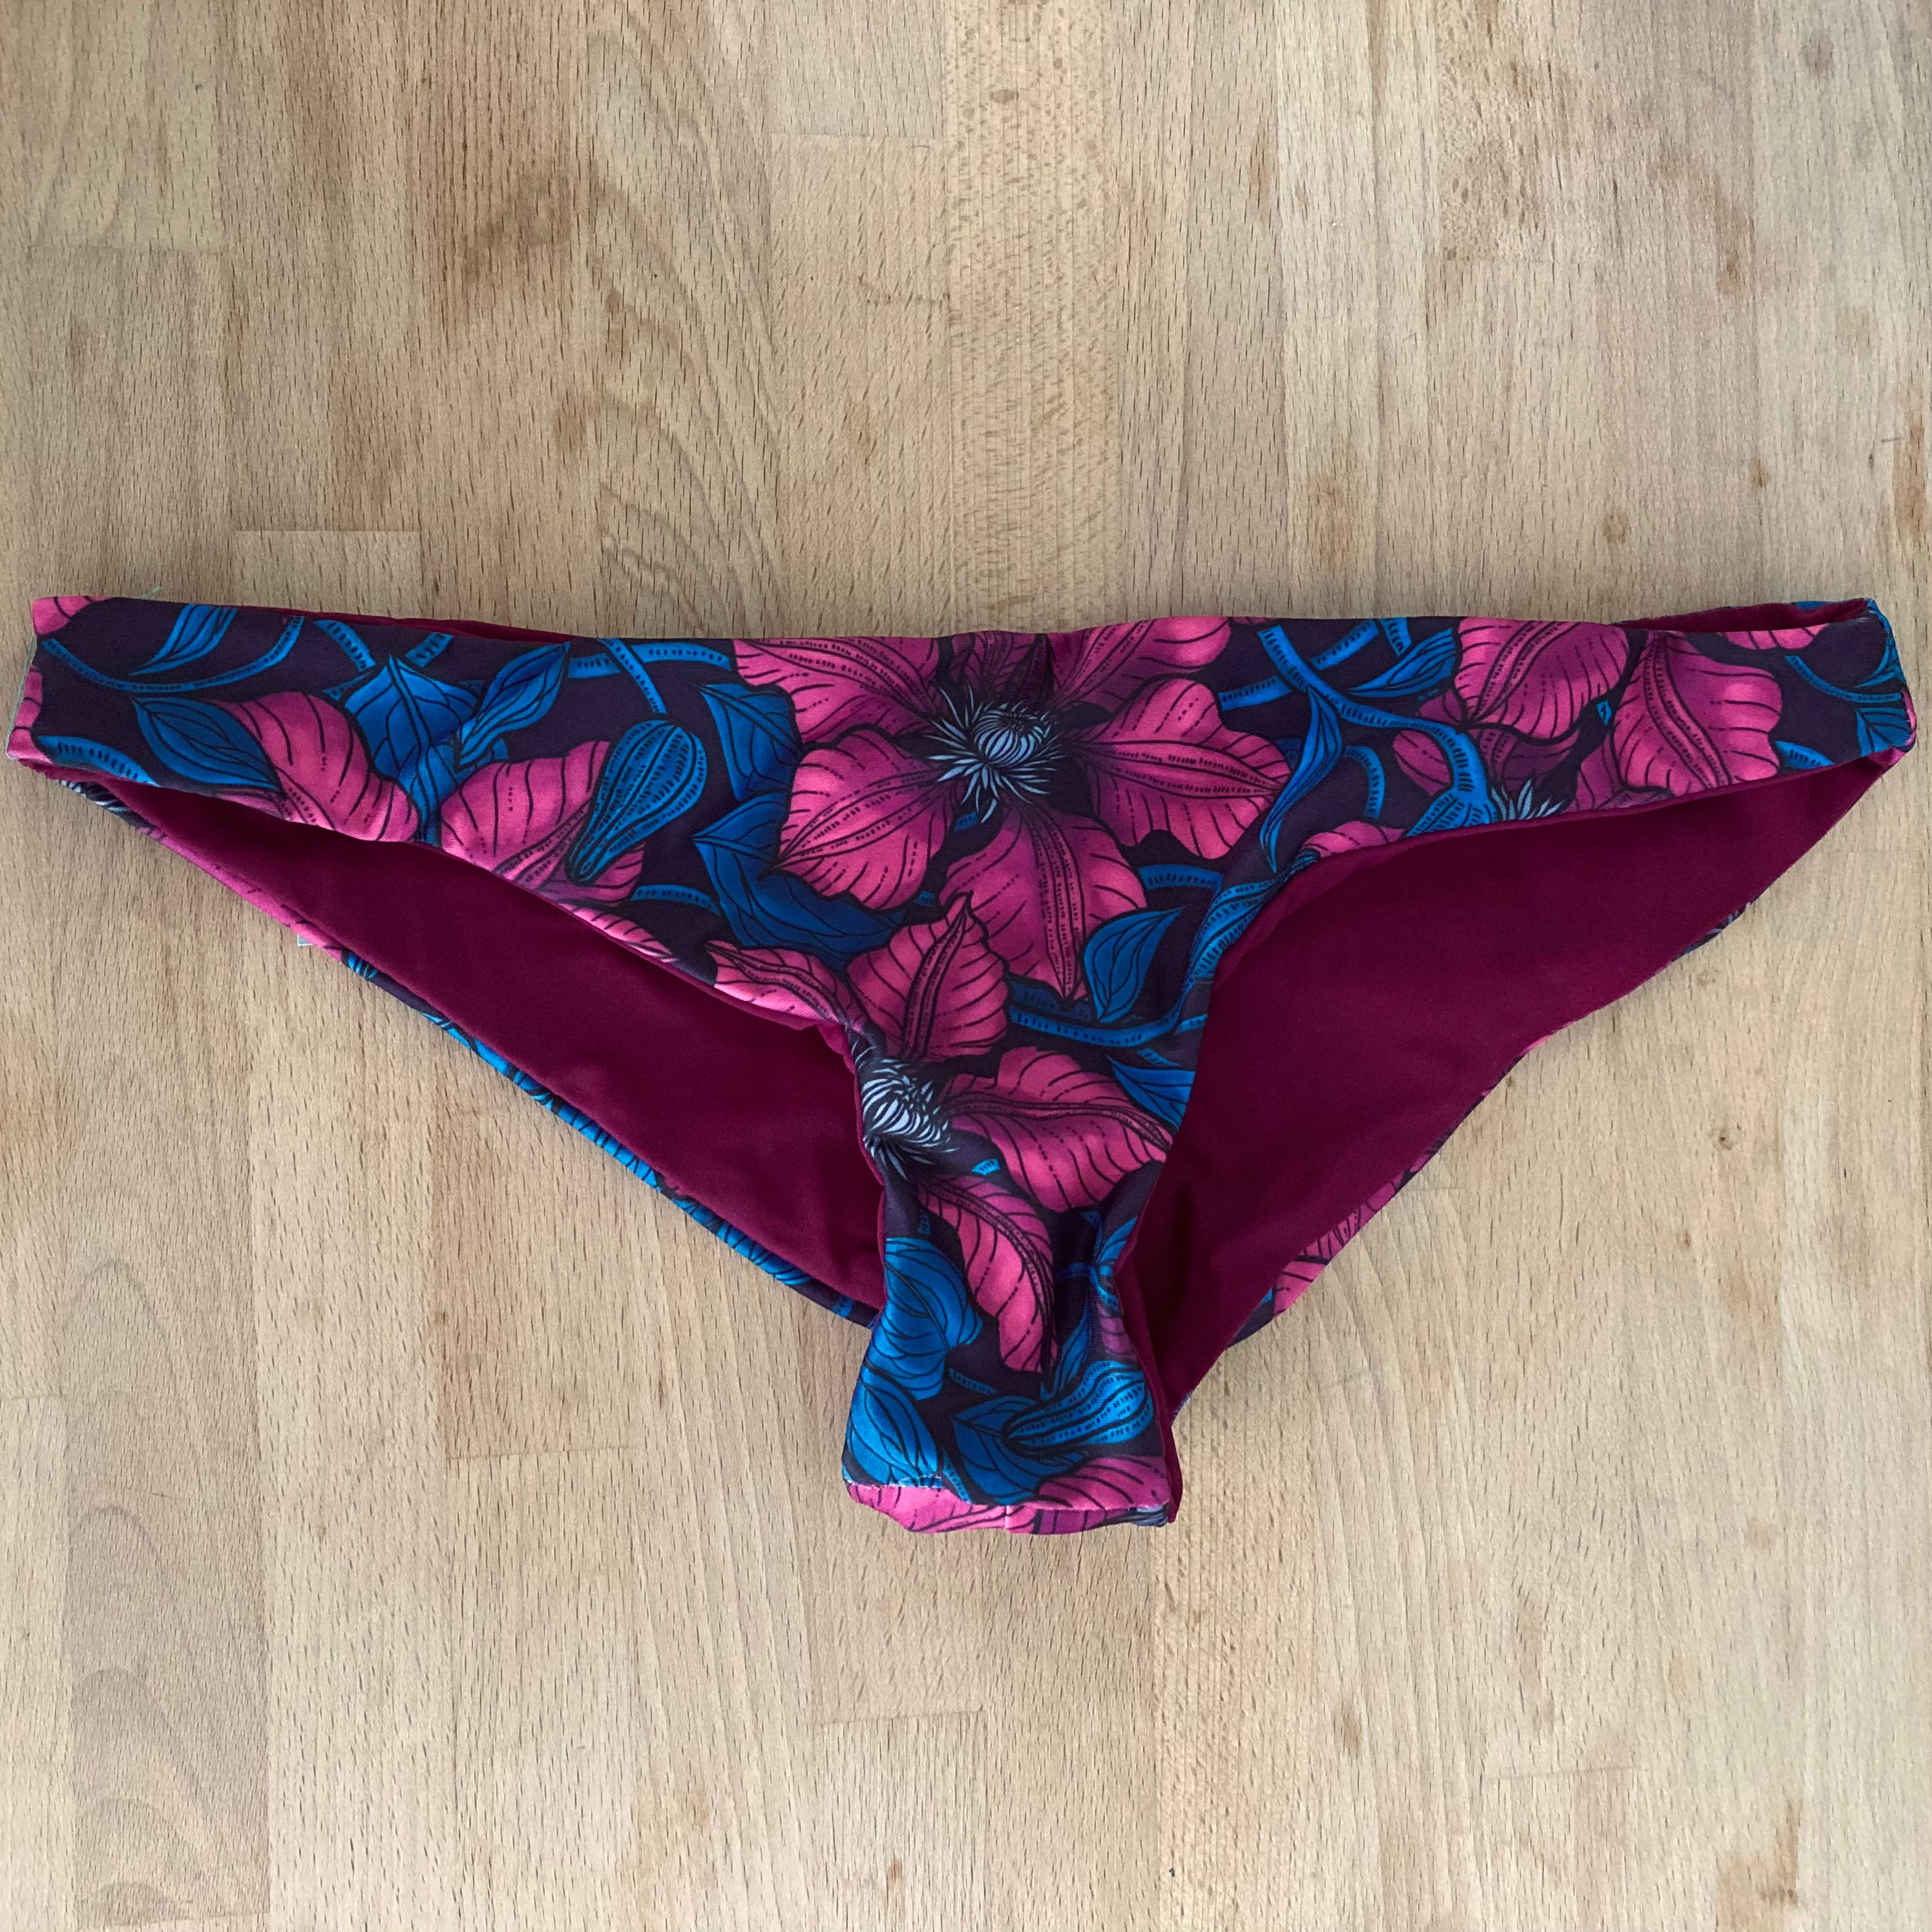 Low-rise Cheeky Bottoms - Pink Clematis  - Size 10